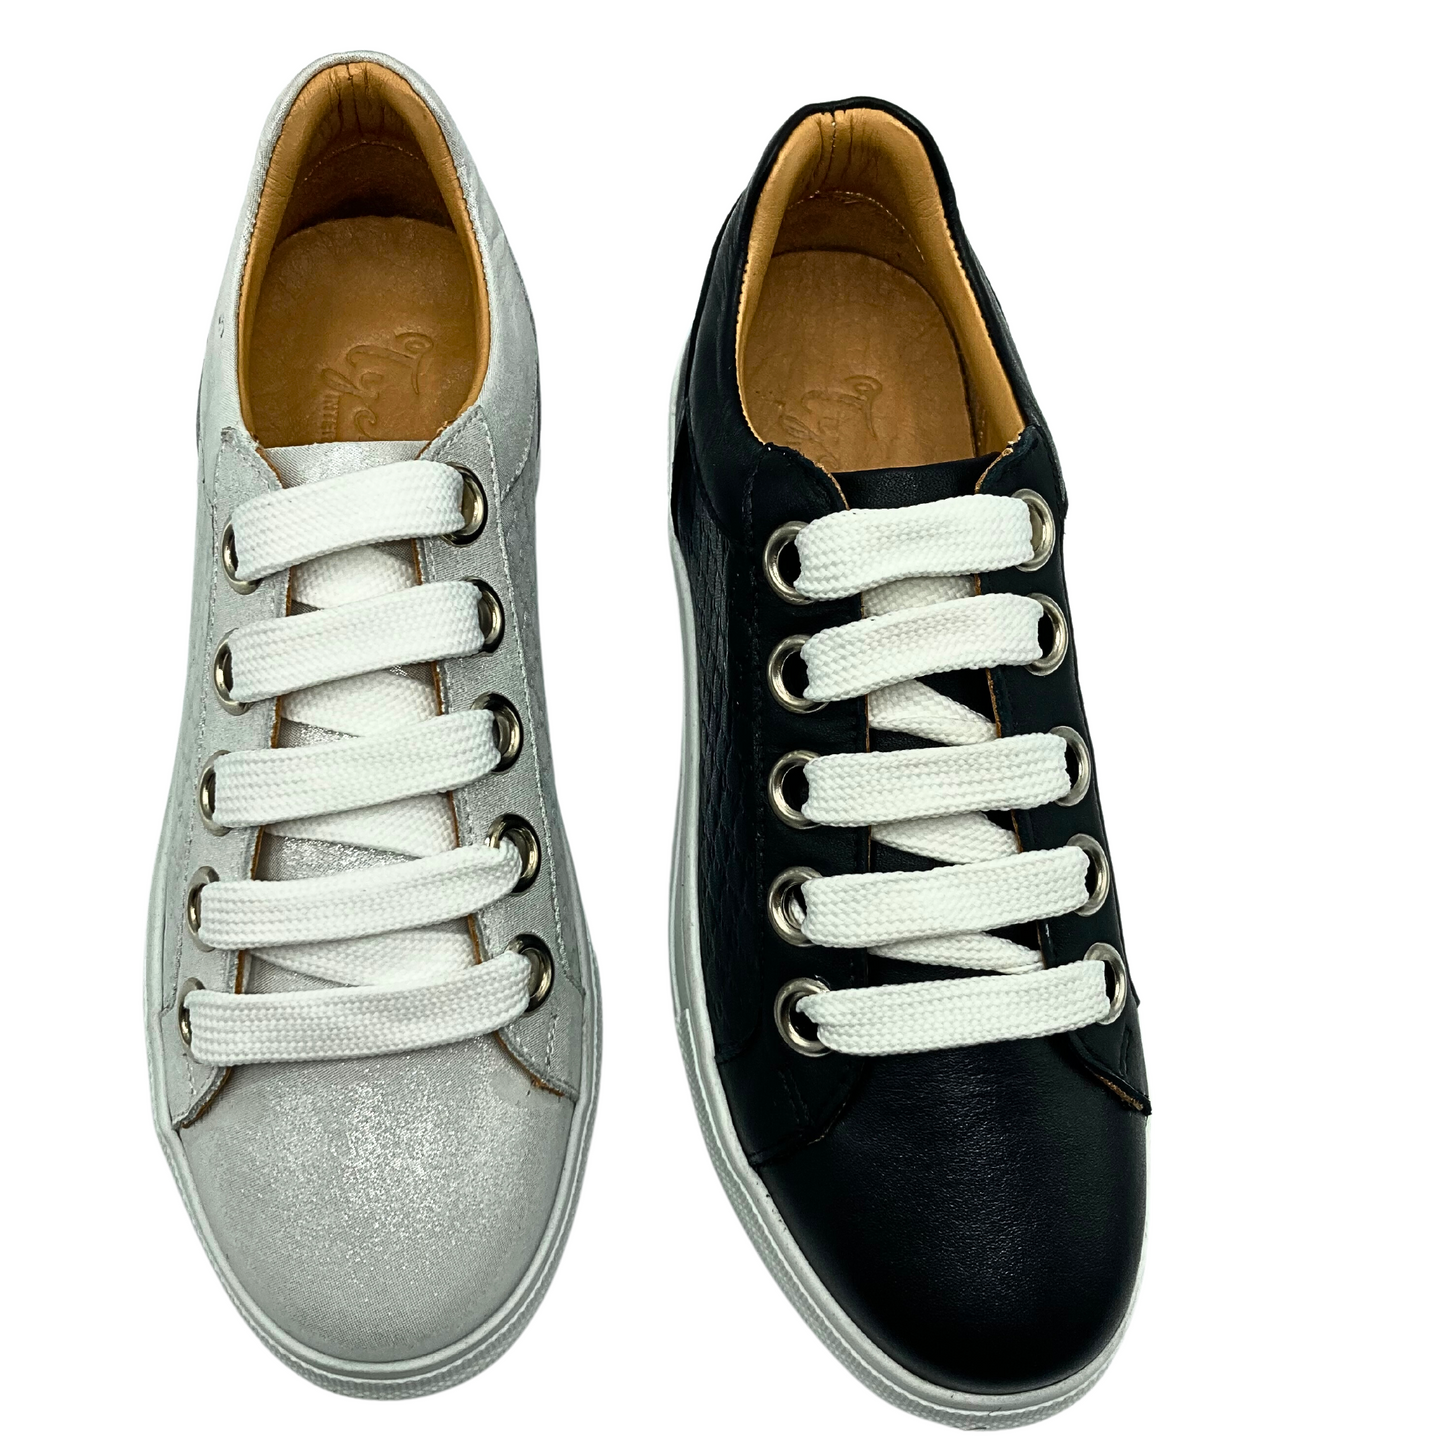 Top down view of a fun sneaker with a shimmery finish to the leather.  Shown in black and light silver with white laces